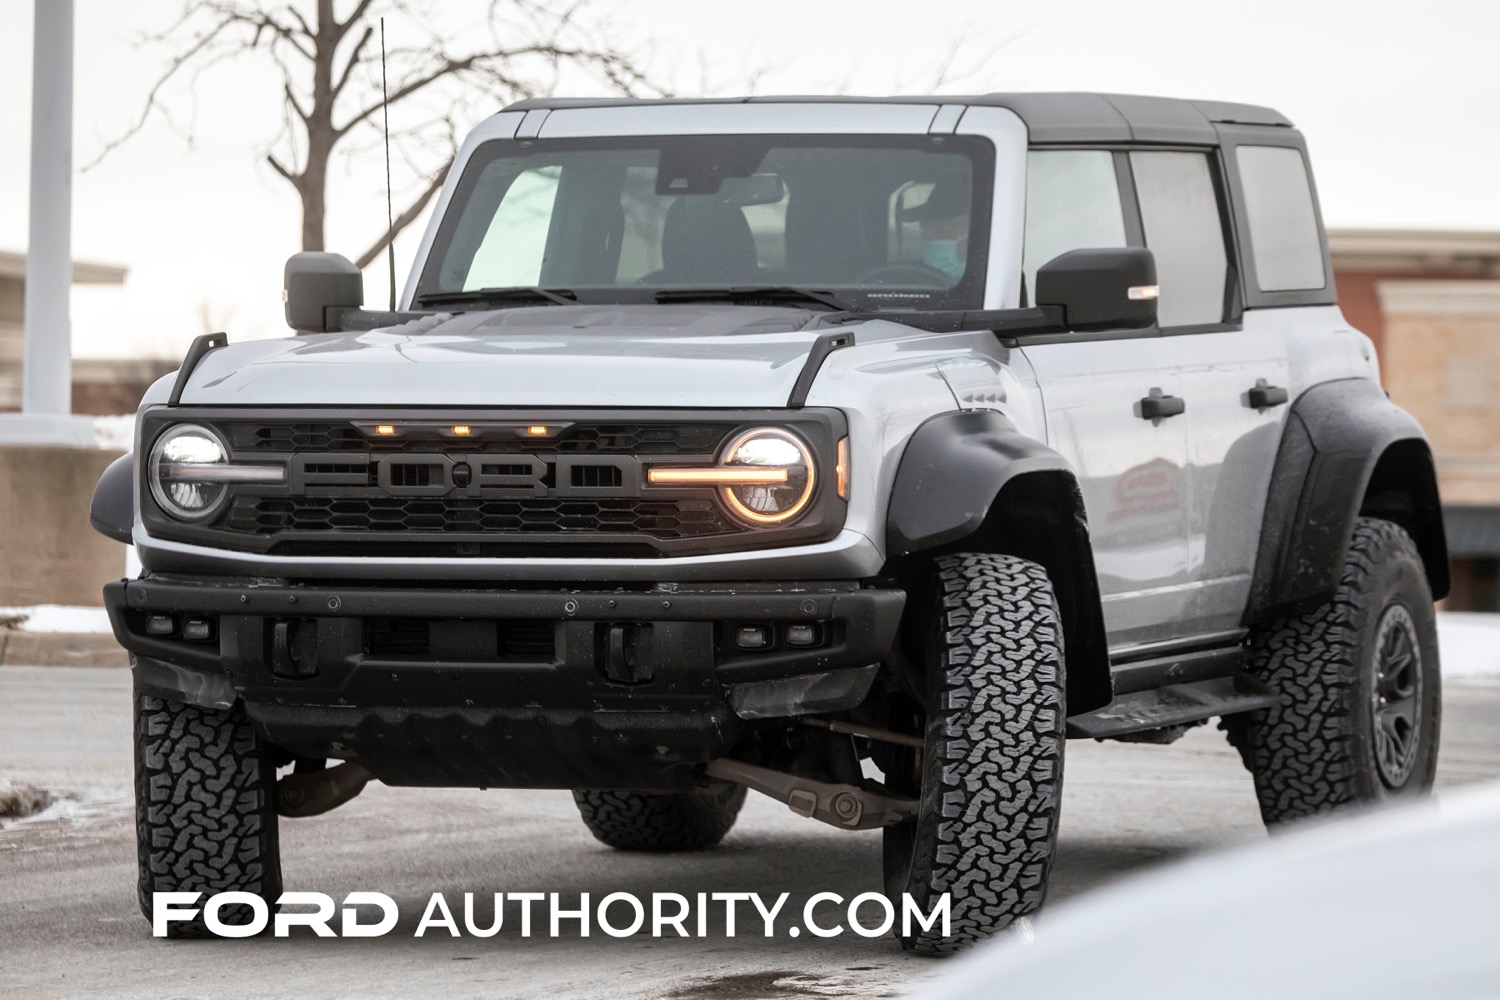 2022-Ford-Bronco-Raptor-Iconic-Silver-Real-World-Photos-Exterior-001.jpg